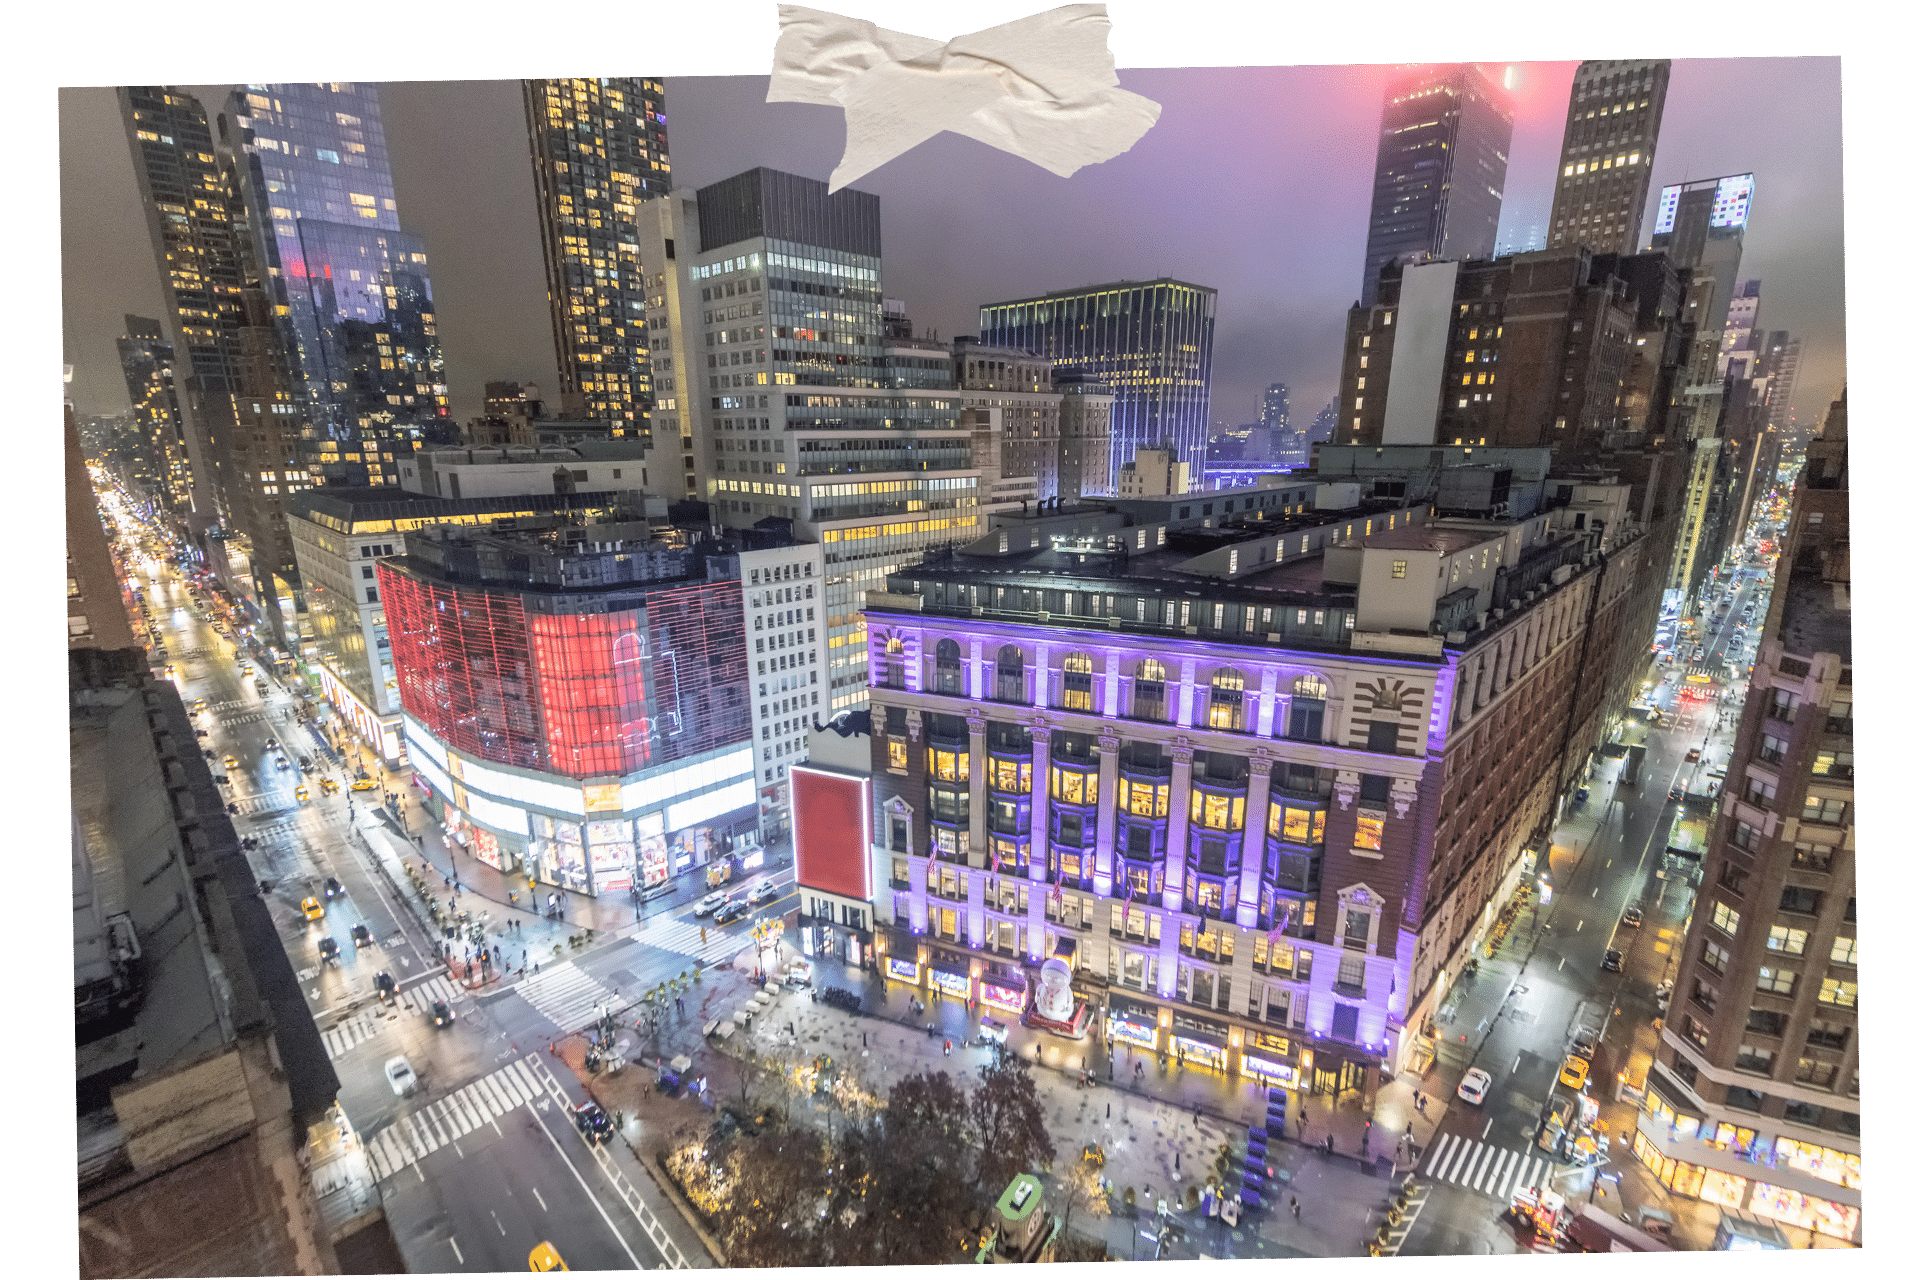 Herald Square is full of NYC's must-visit stores. Image shows a busy shopping area at night from above. Midrise buildings are lit up in various colours, skyscrapers loom all around, and shoppers pass by down on the ground below.